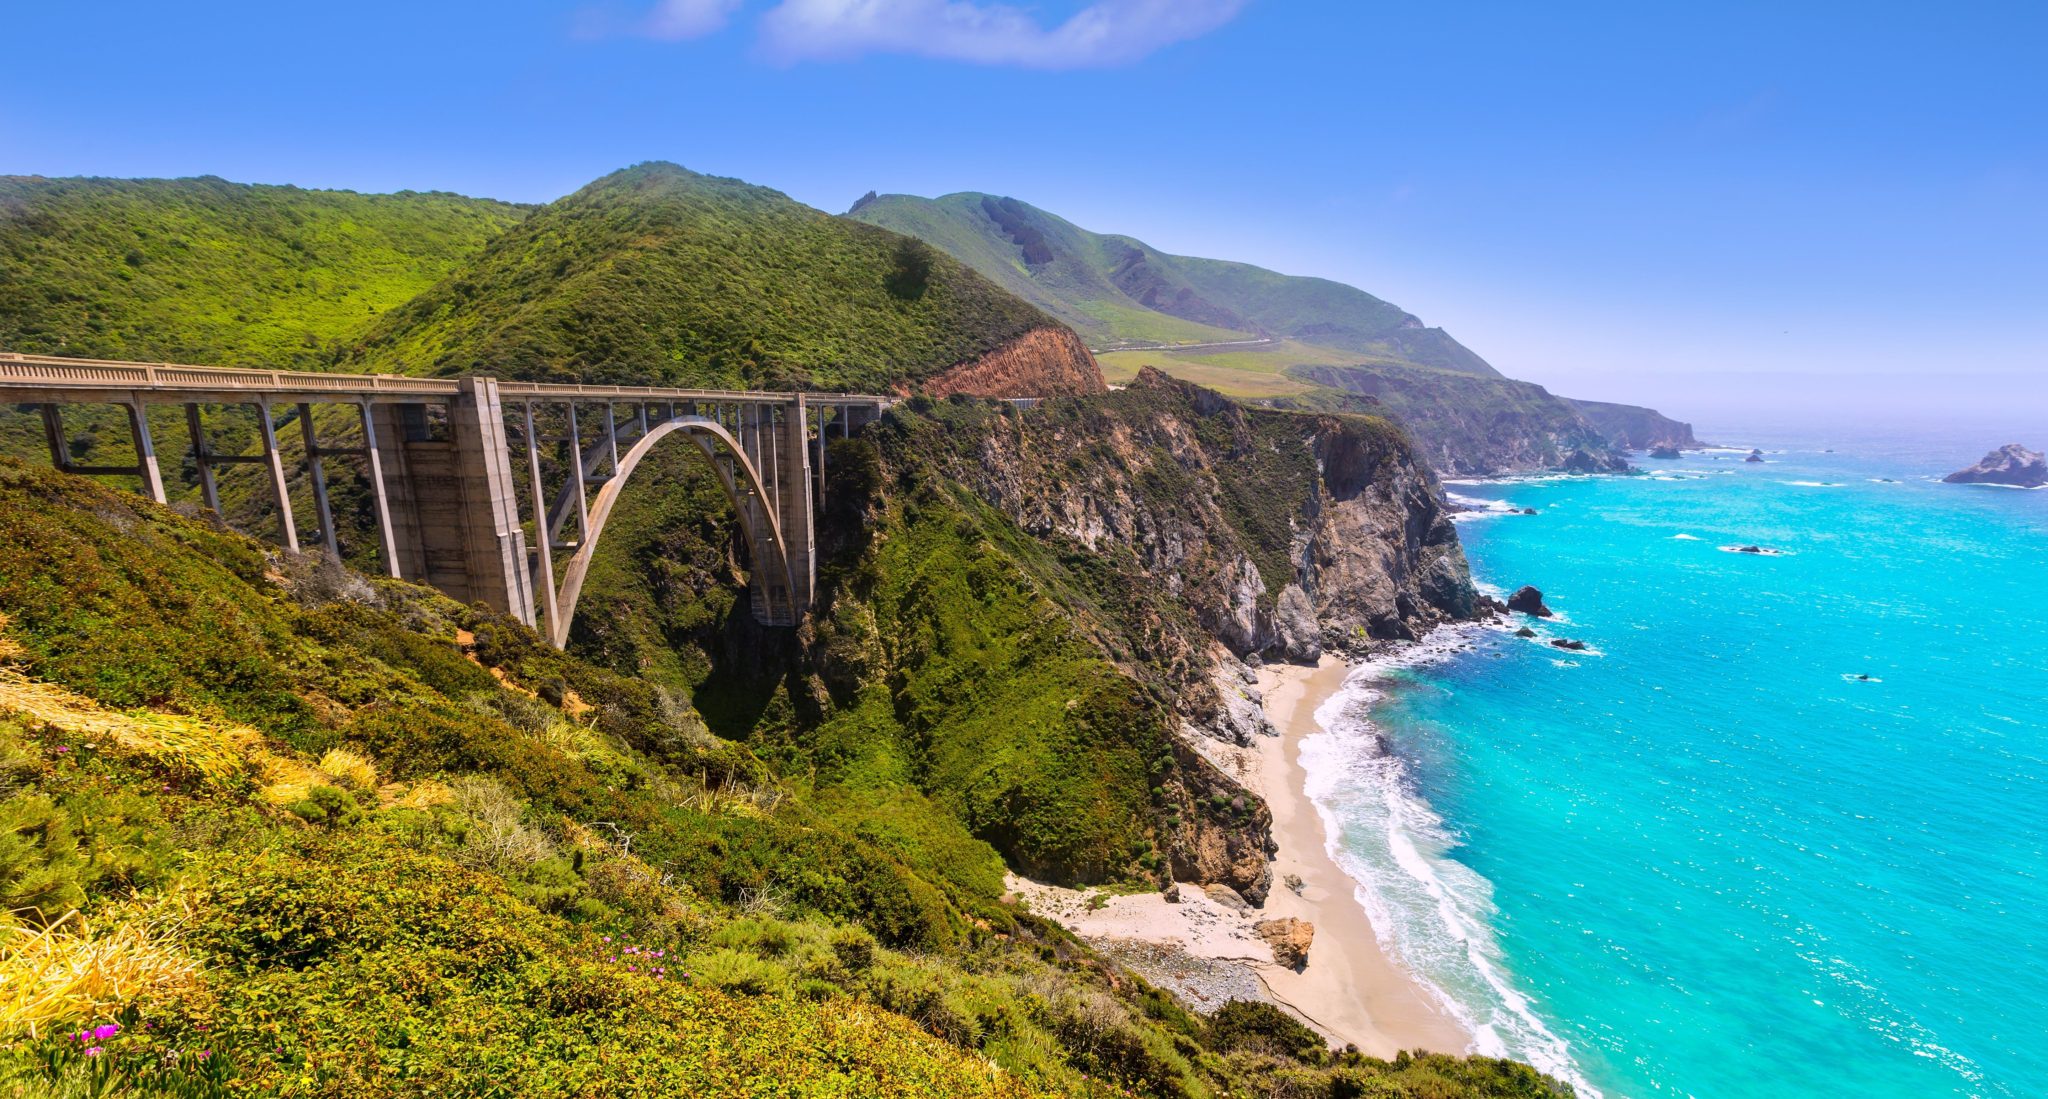 California Bixby bridge in Big Sur in Monterey County along State Route 1